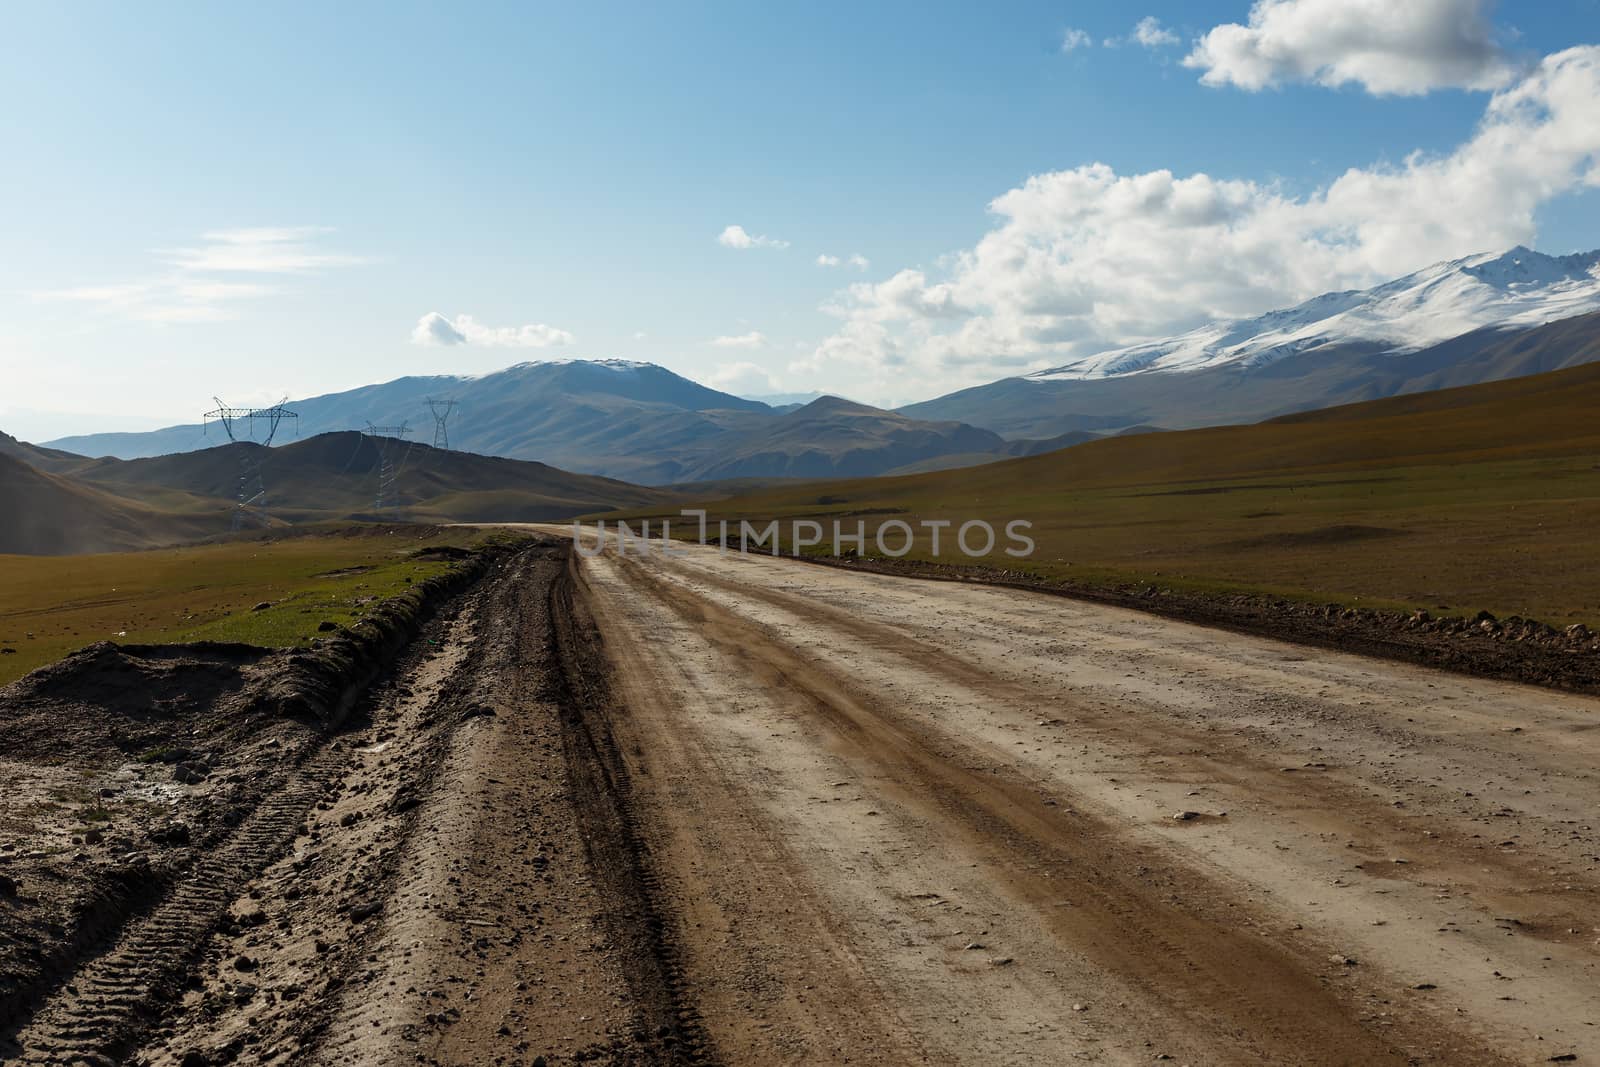 A367 highway passing in the Naryn region, Kyrgyzstan, mountain road to the Kyzart pass